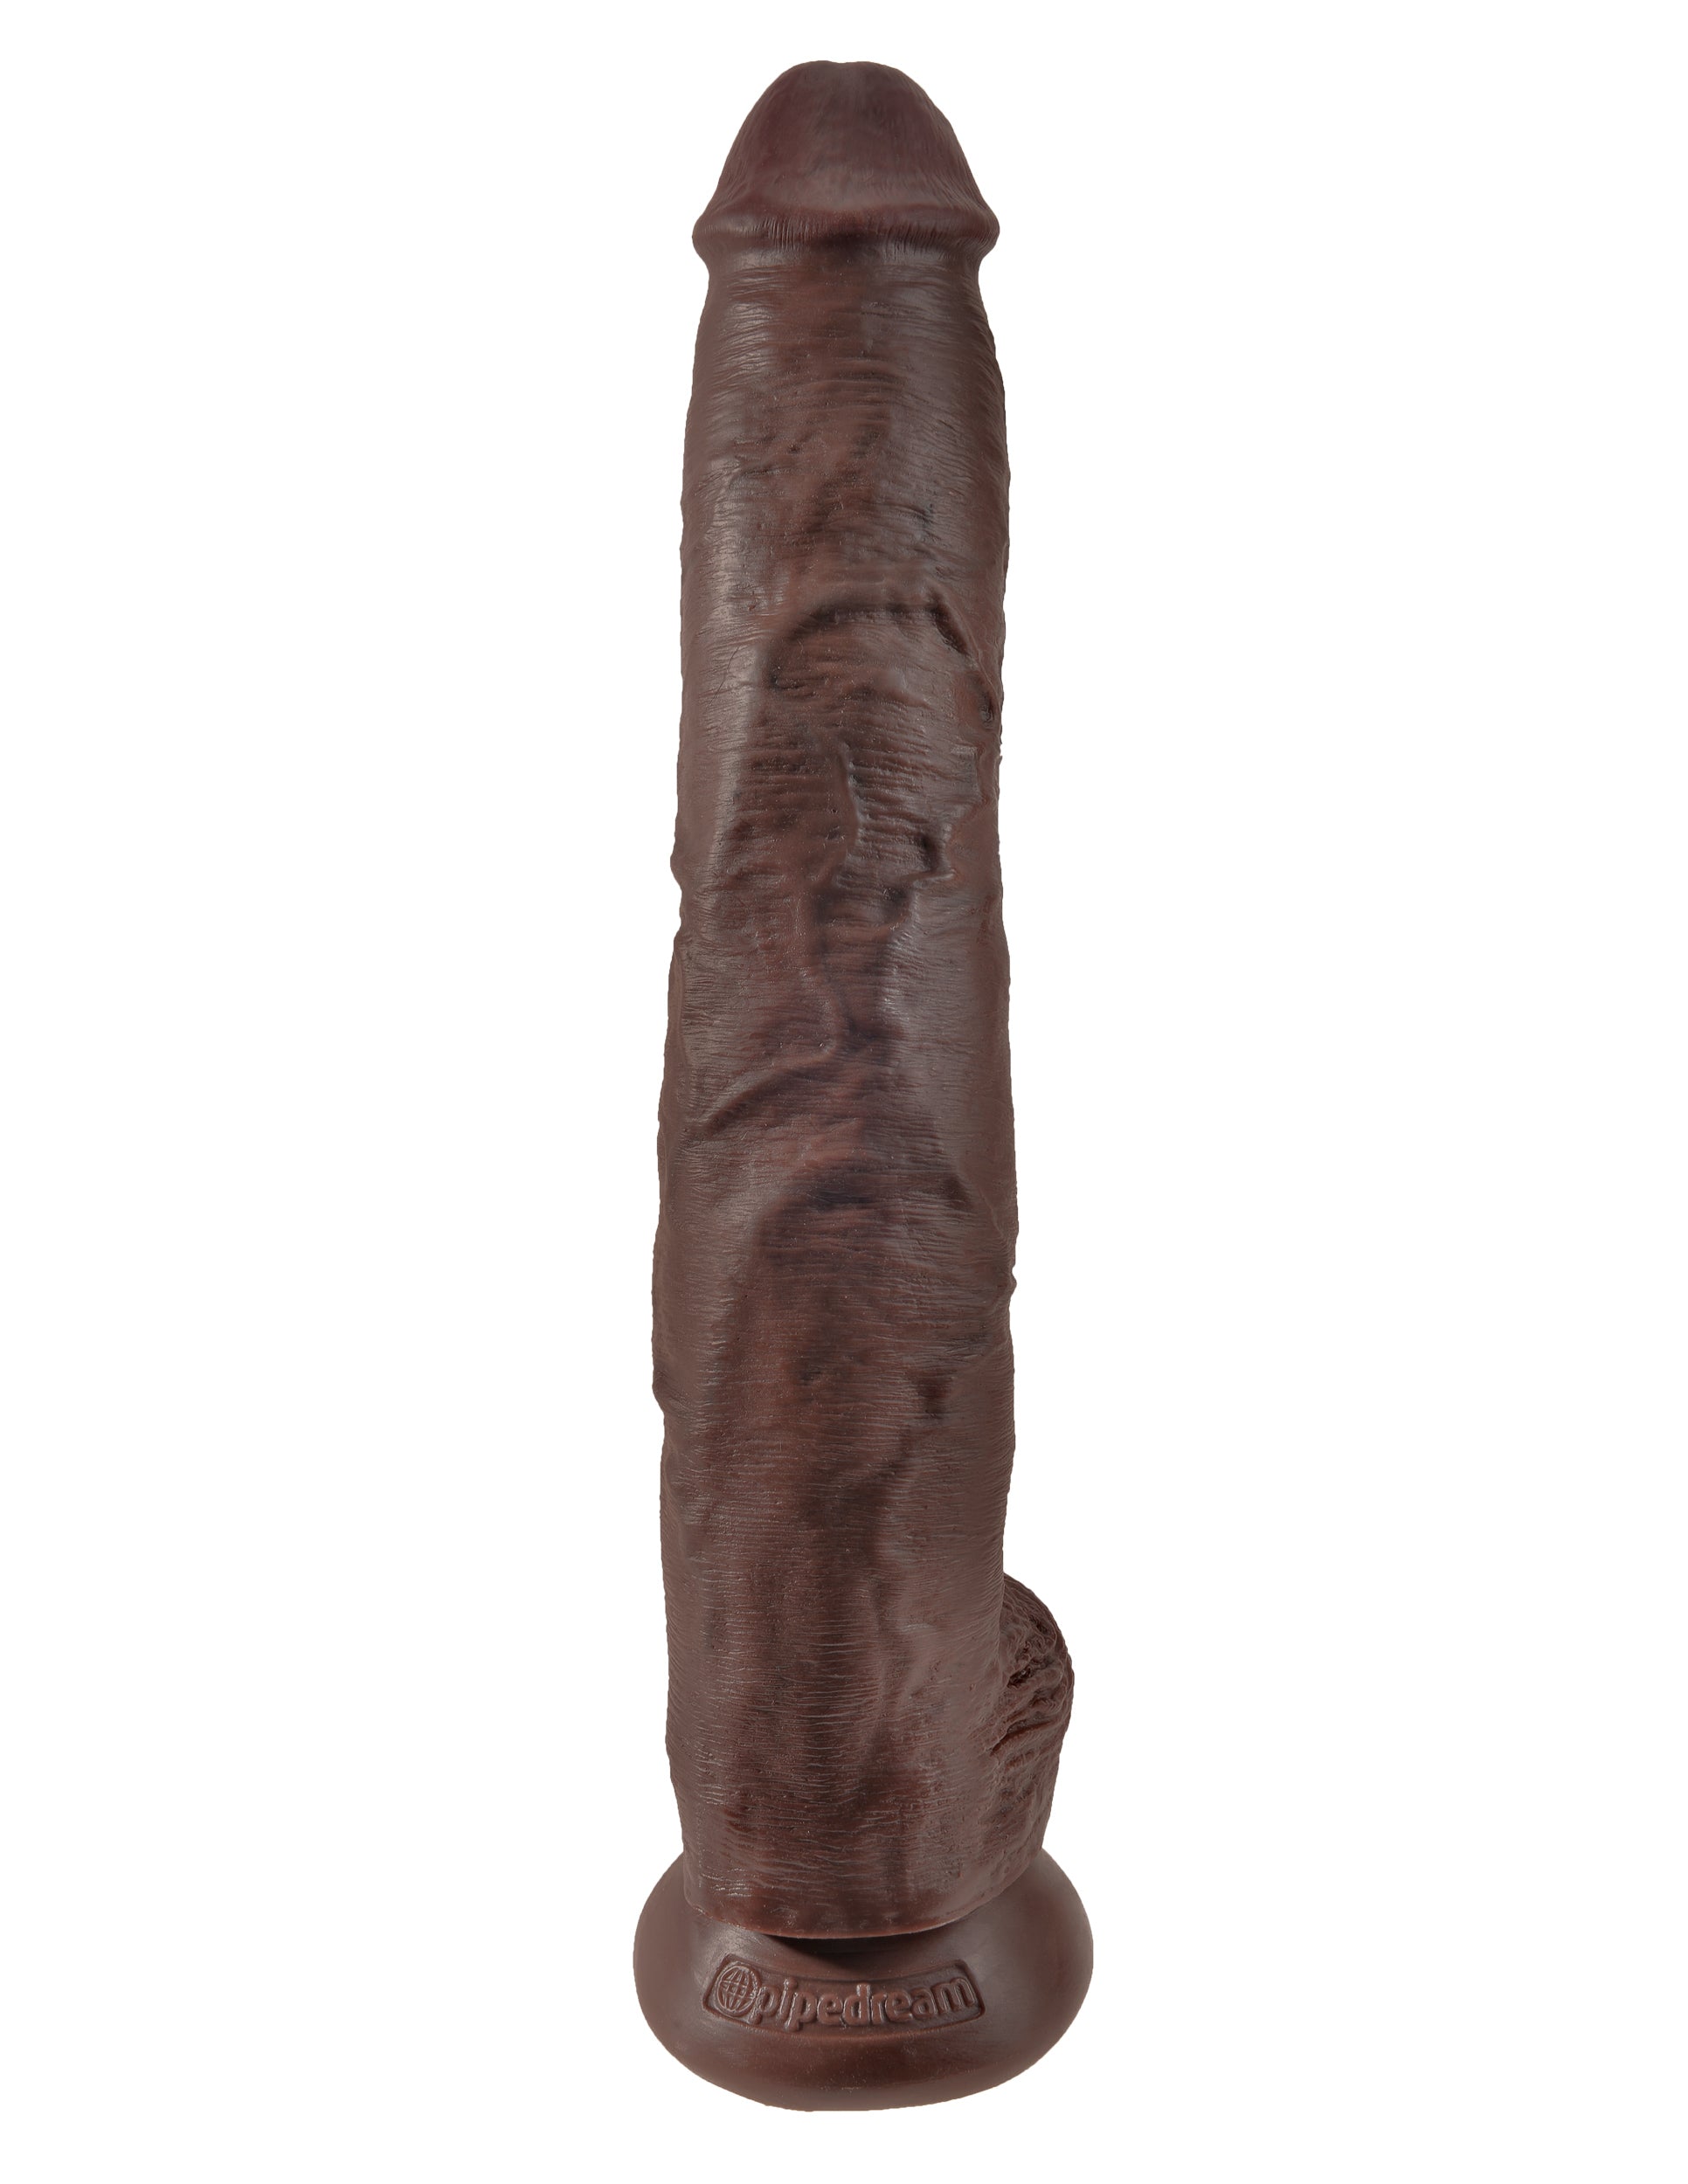 King Cock 14 Cock With Balls - Brown PD5534-29